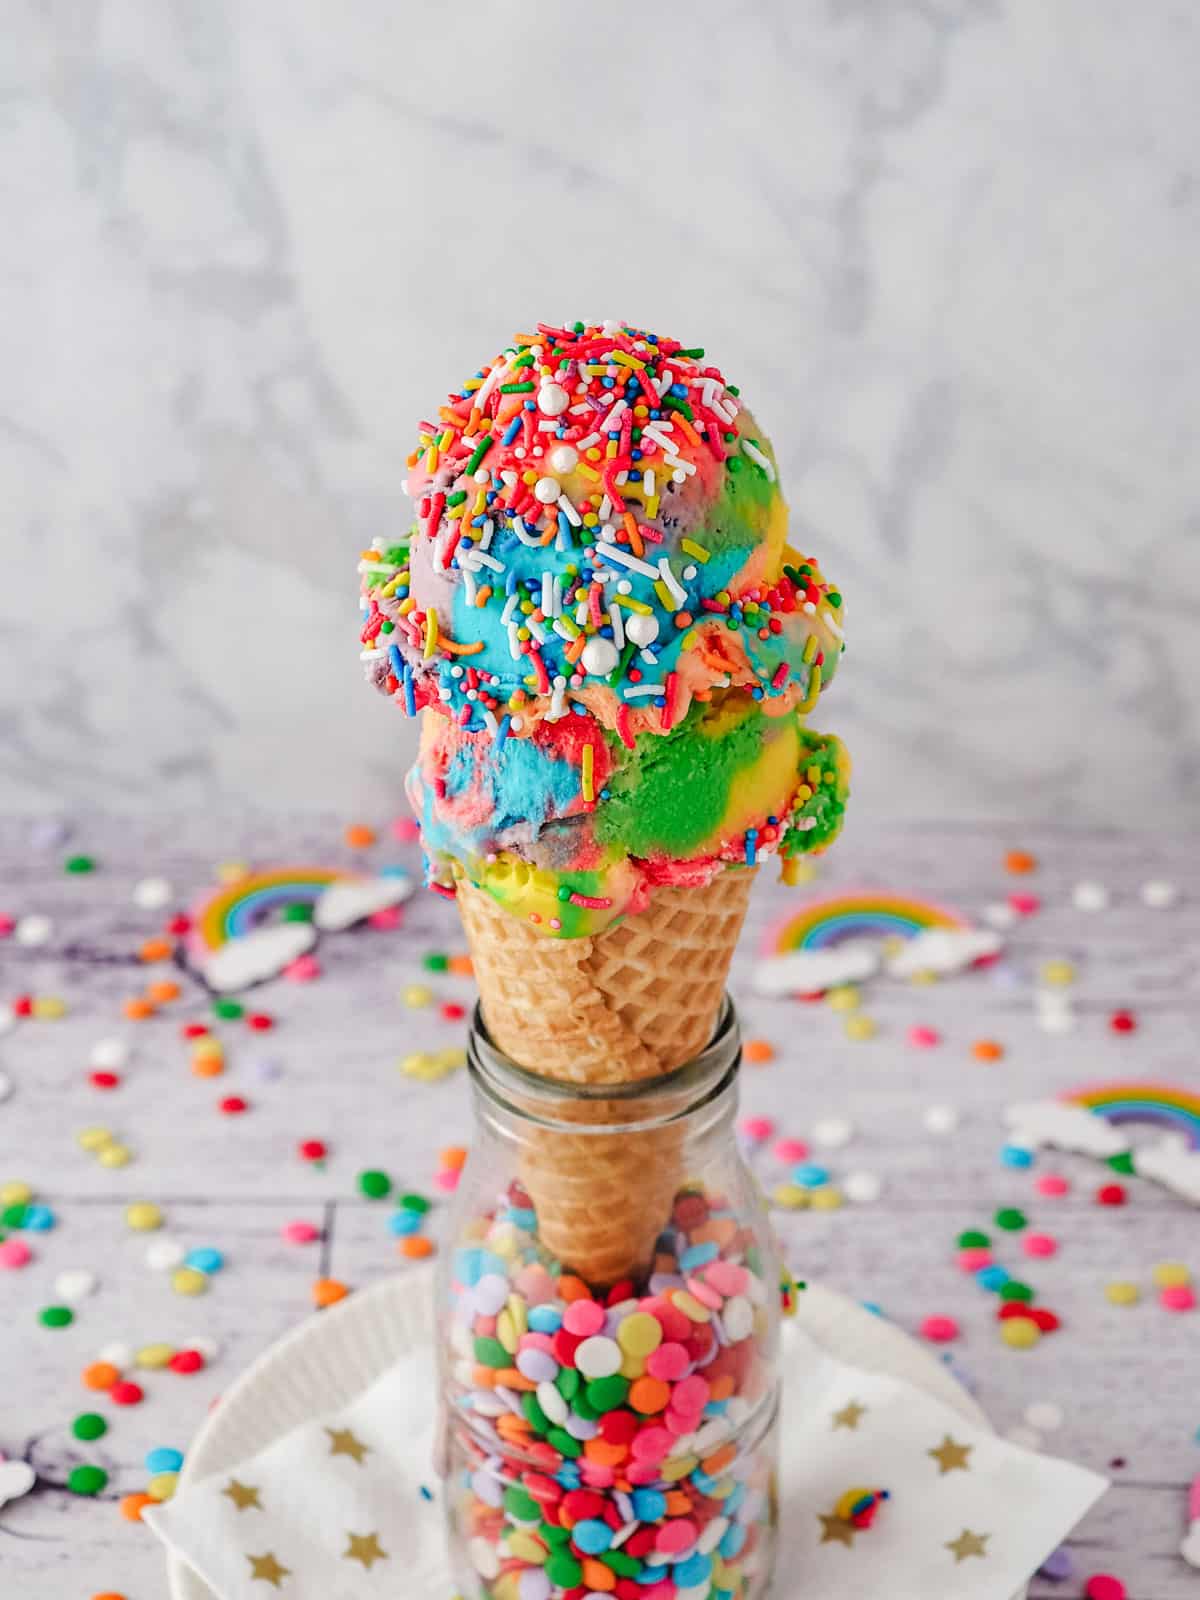 Two scoops of rainbow ice cream with rainbow sprinkles in an ice cream cone.